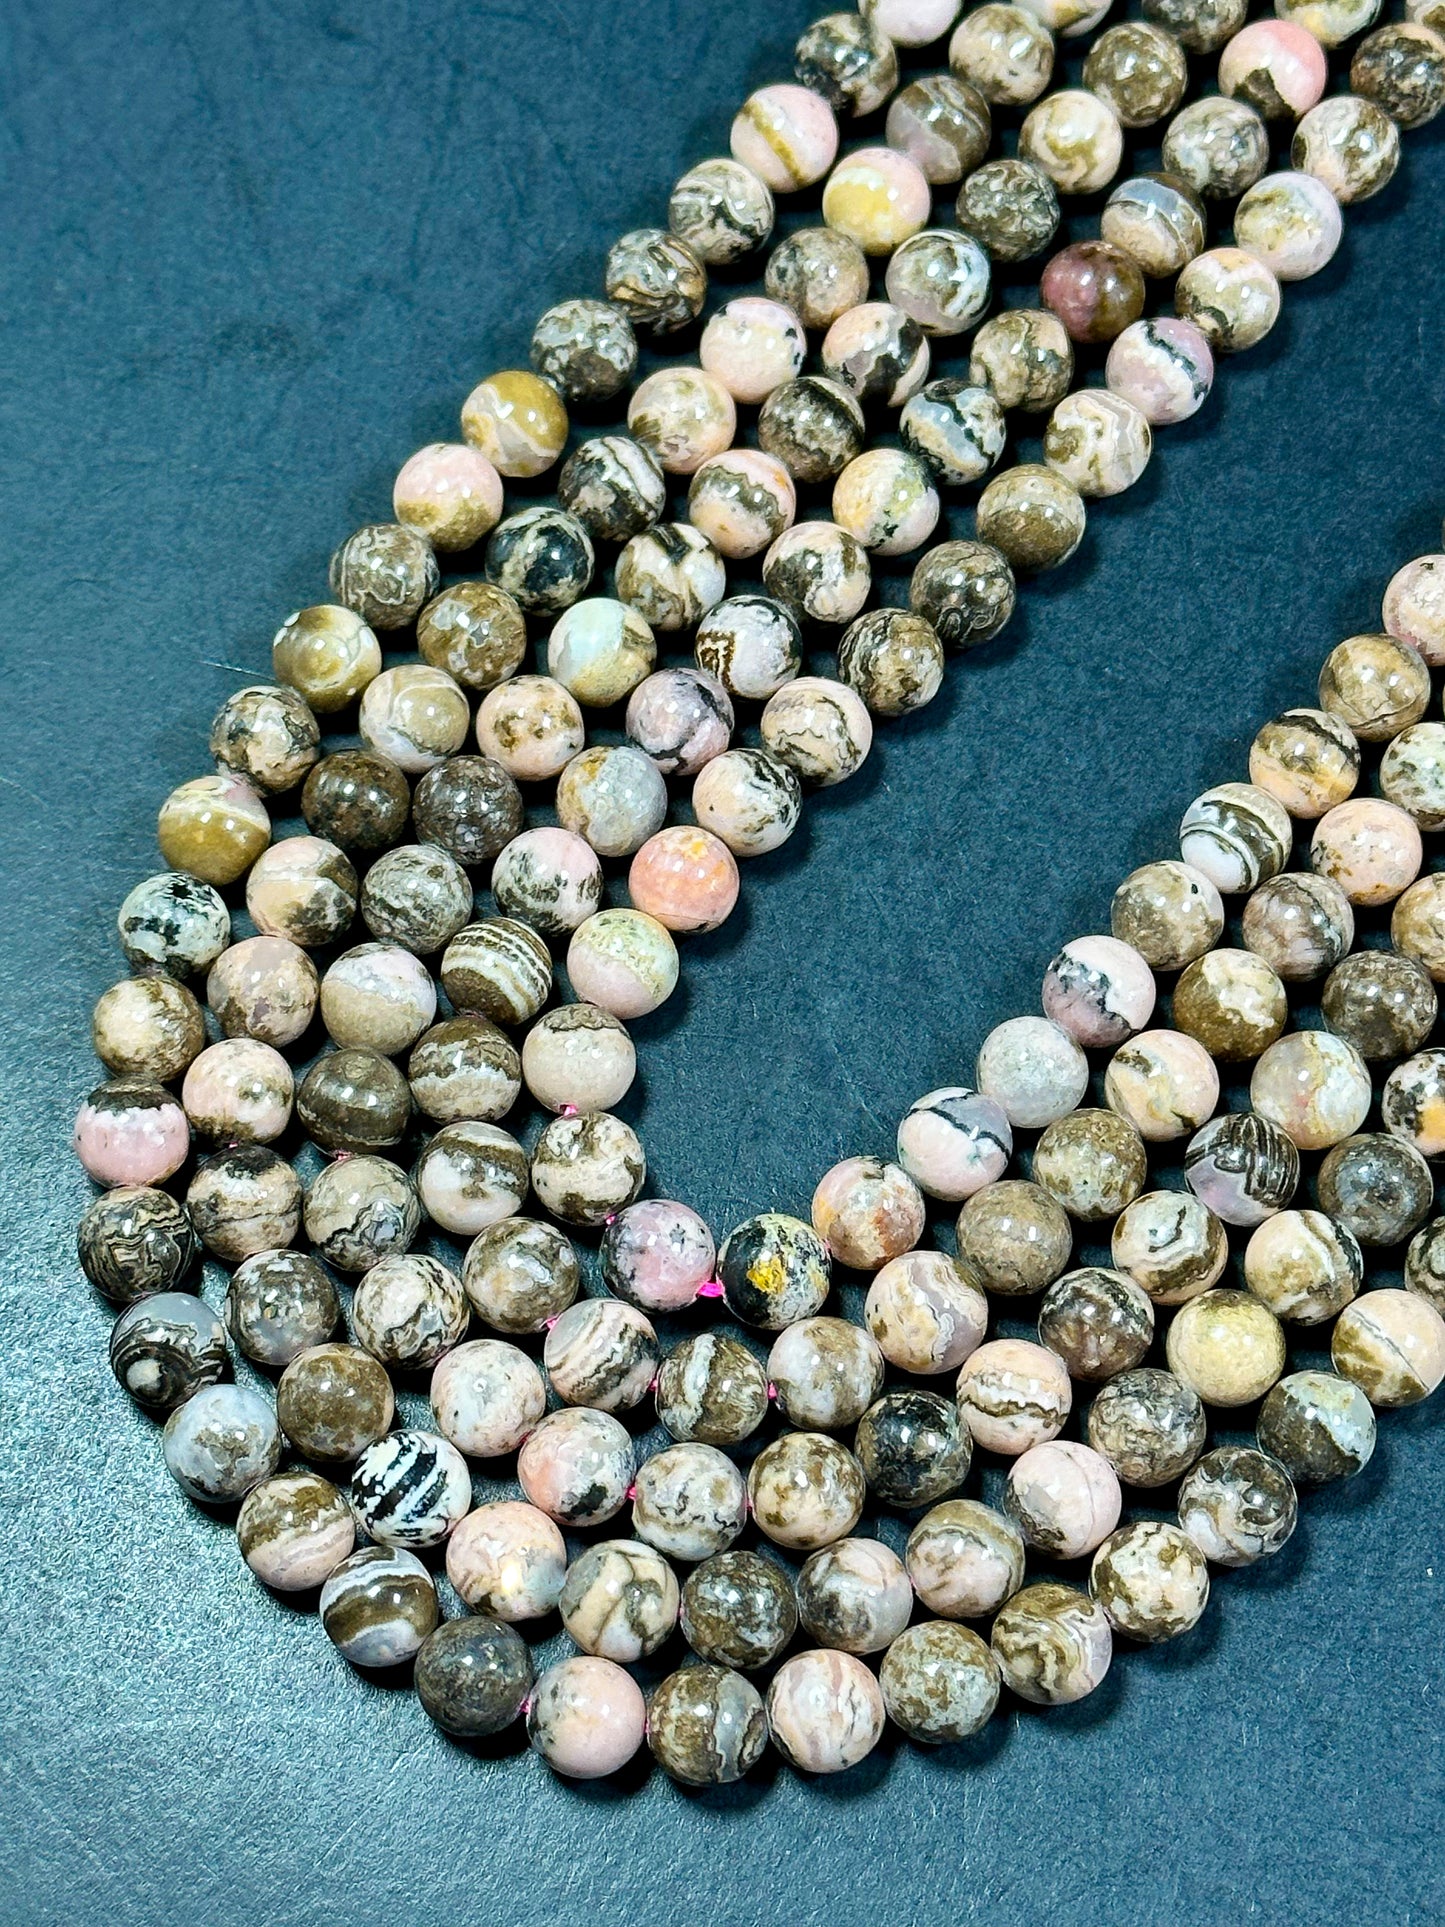 NATURAL Rhodochrosite Gemstone Bead 6mm 8mm 10mm 12mm Round Beads, Beautiful Pink Brown Color Rhodochrosite Gemstone Beads Full Strand 15.5"